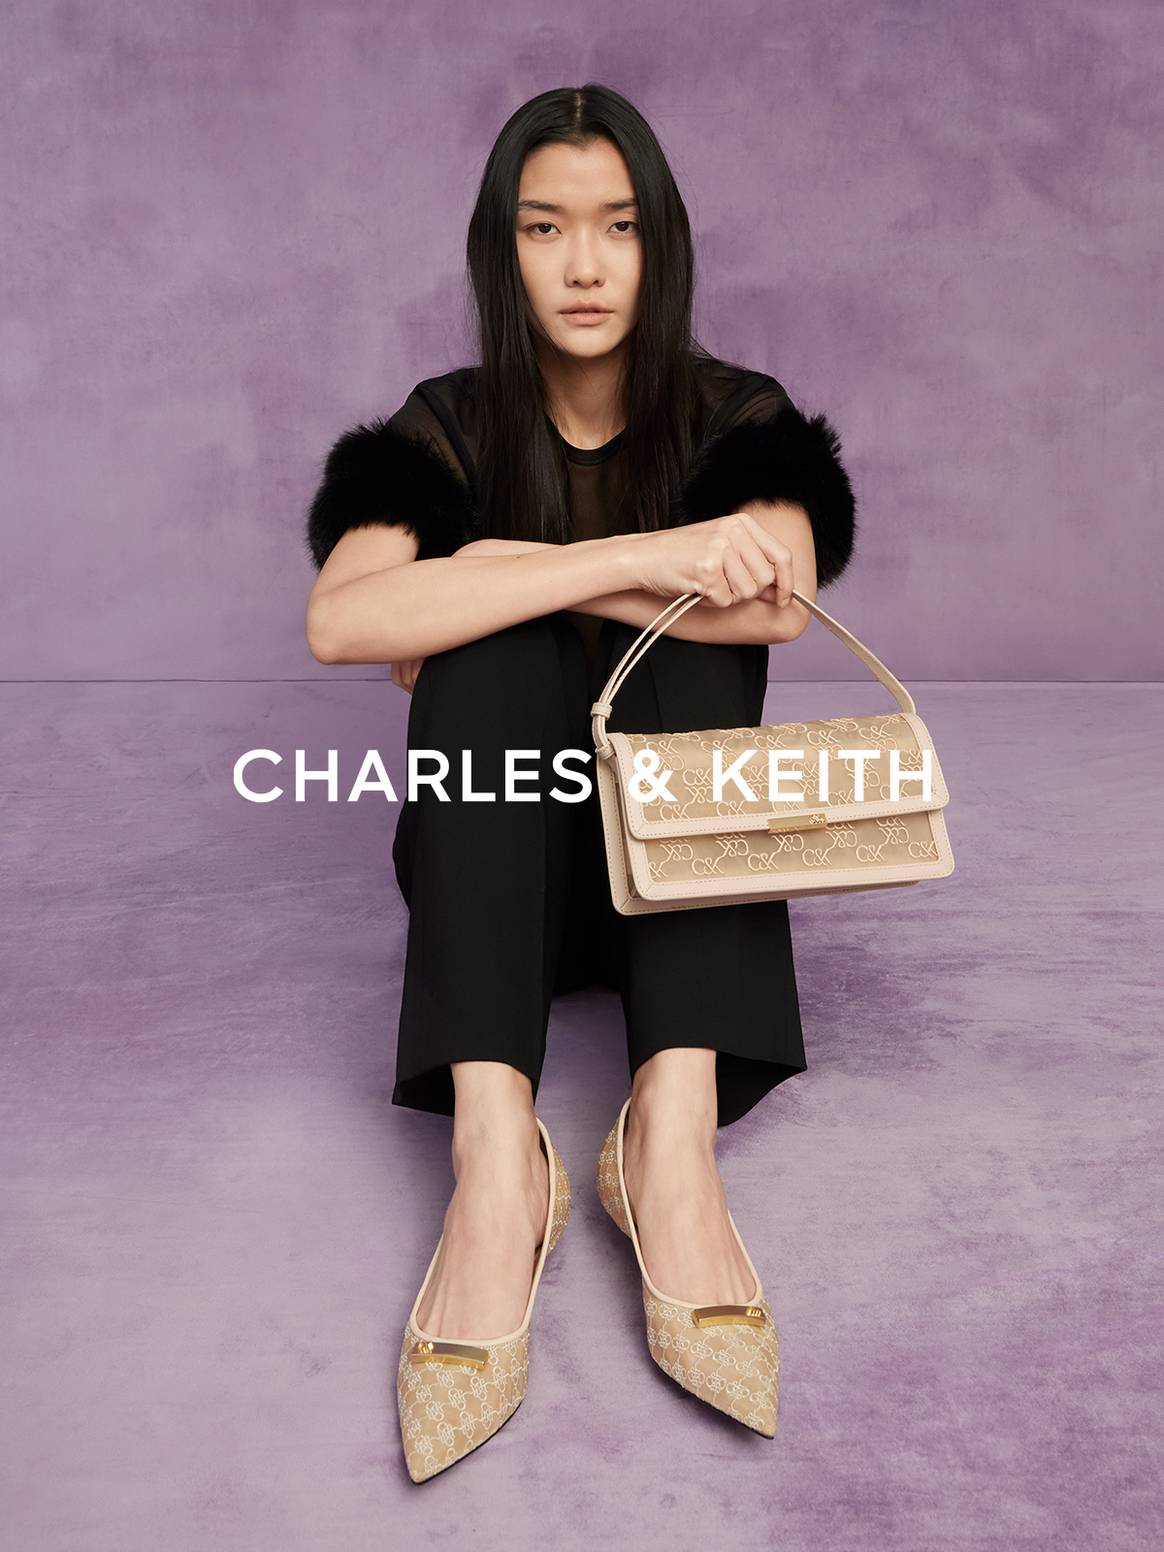 Charles & Keith ‘L’initial’ collection campaign